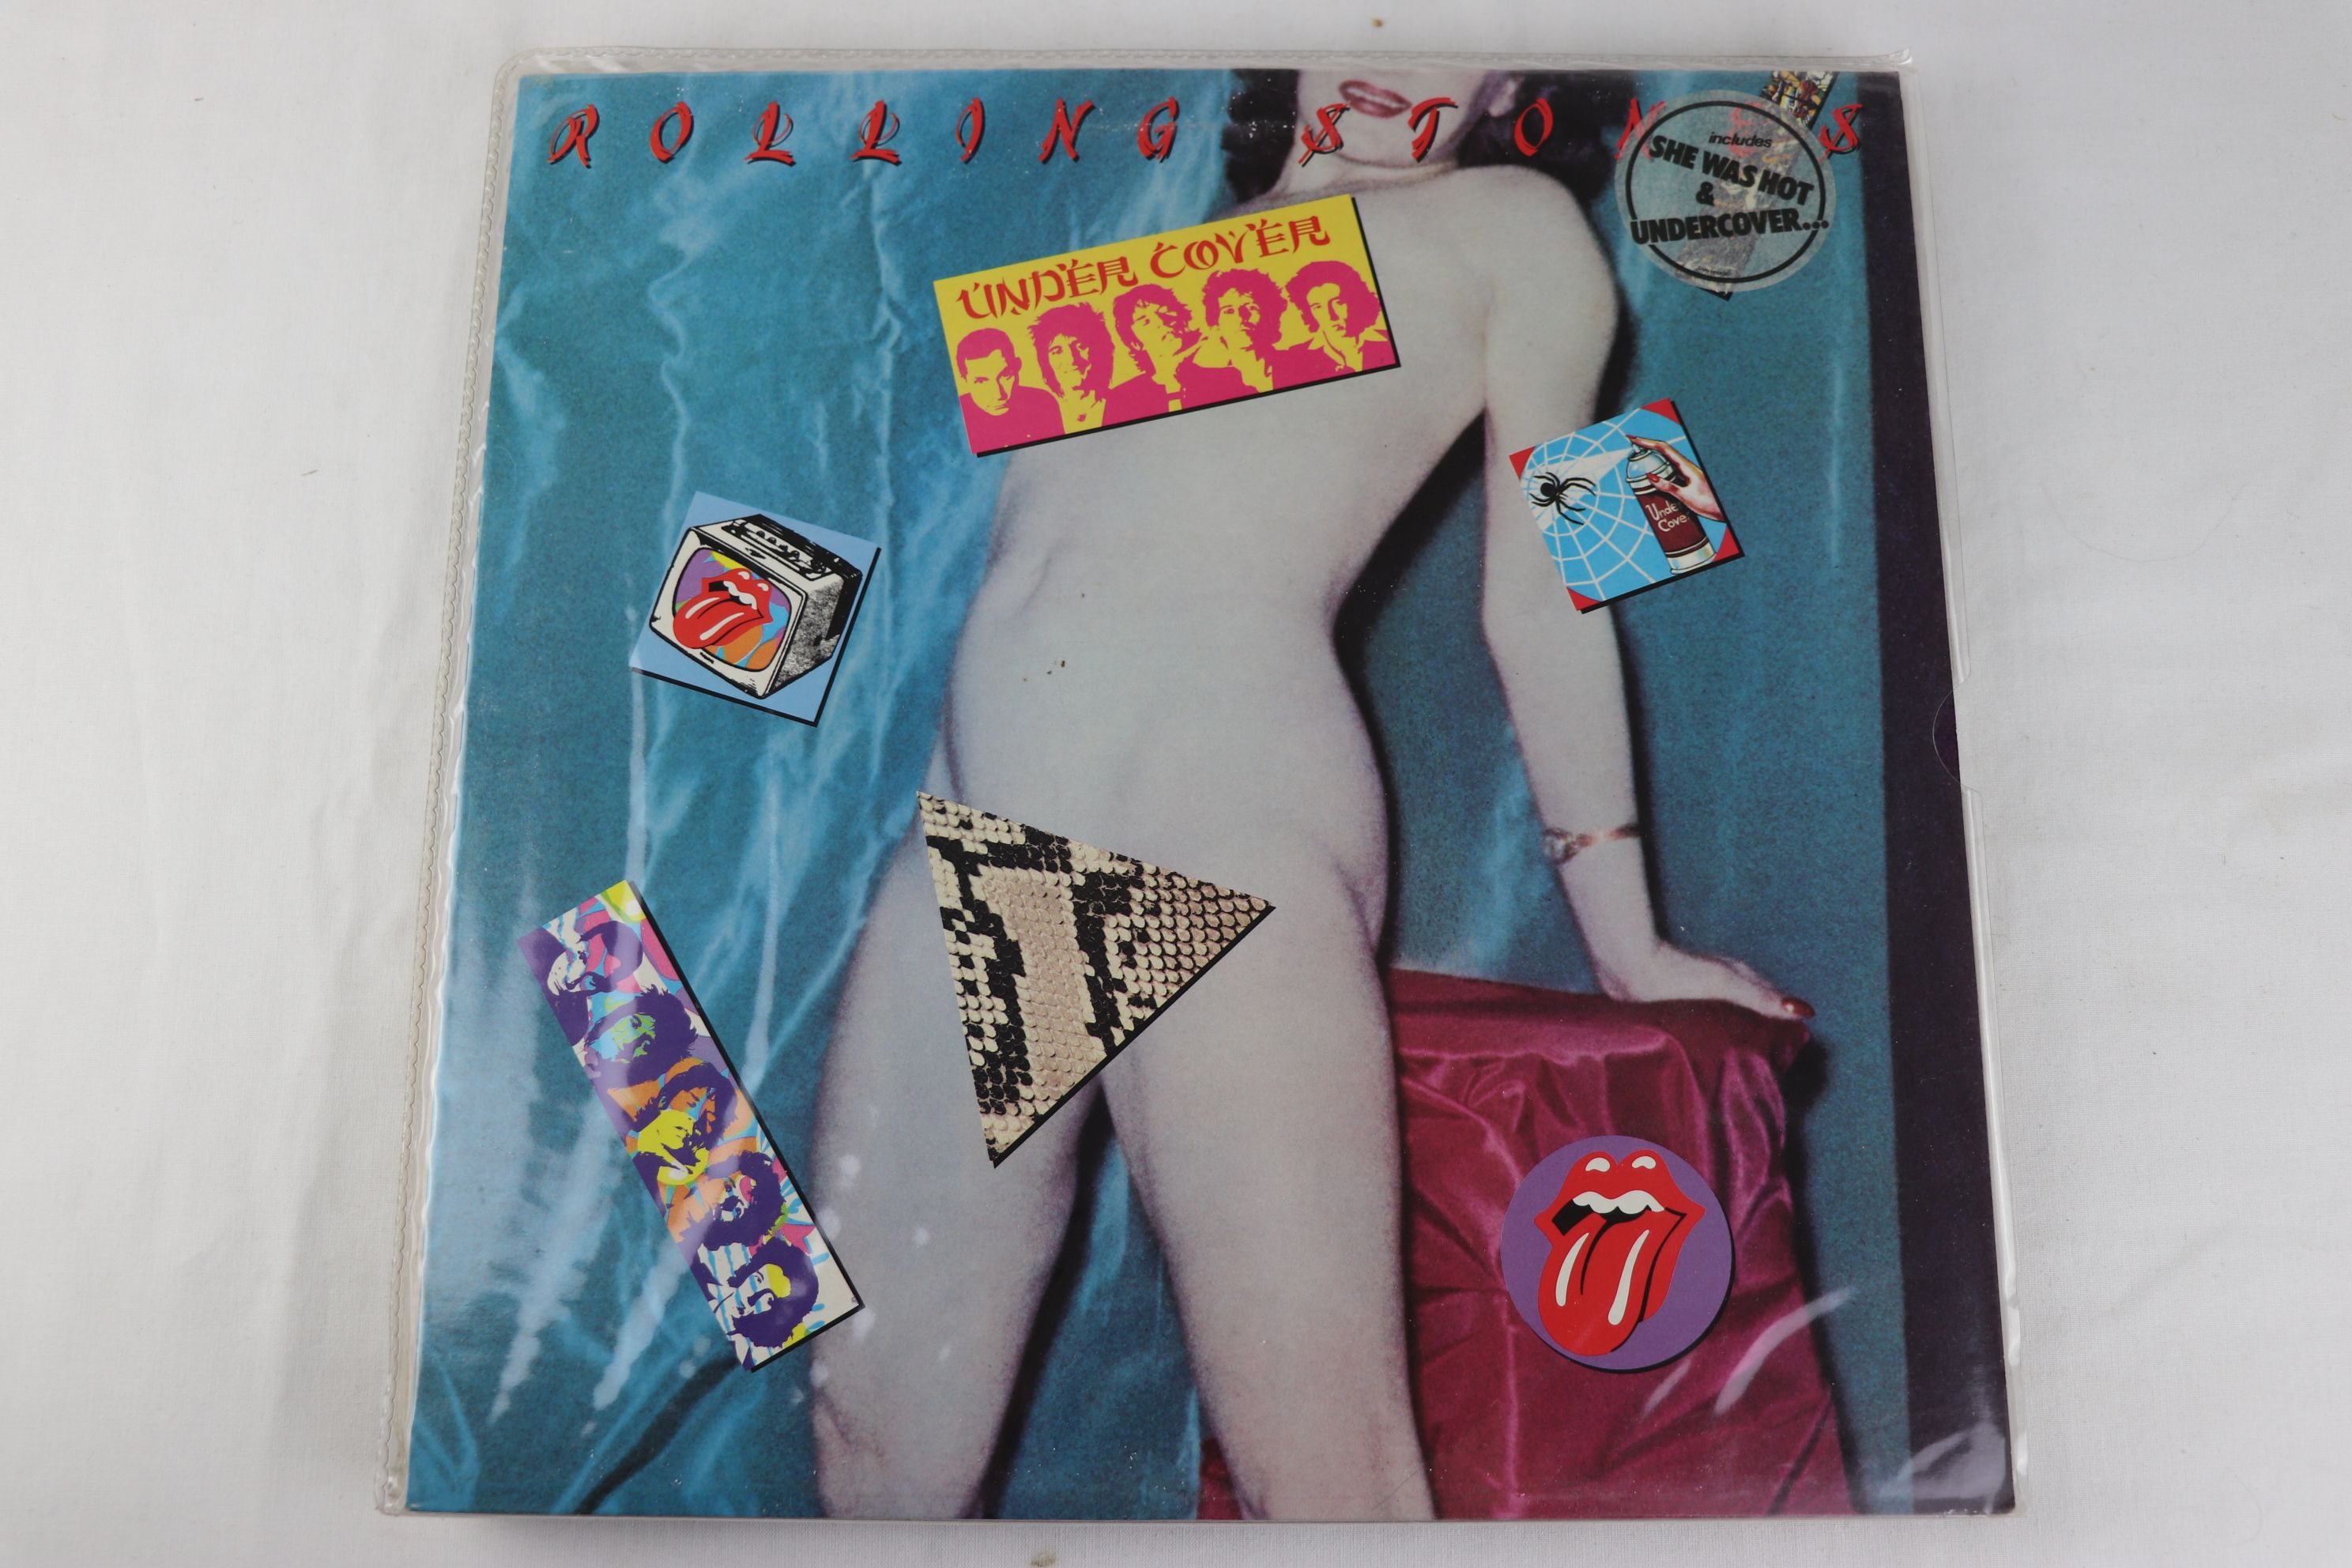 Vinyl - Five The Rolling Stones LPs plus a pink coloured Miss You 12", LPs include Rolled Gold, - Image 3 of 7